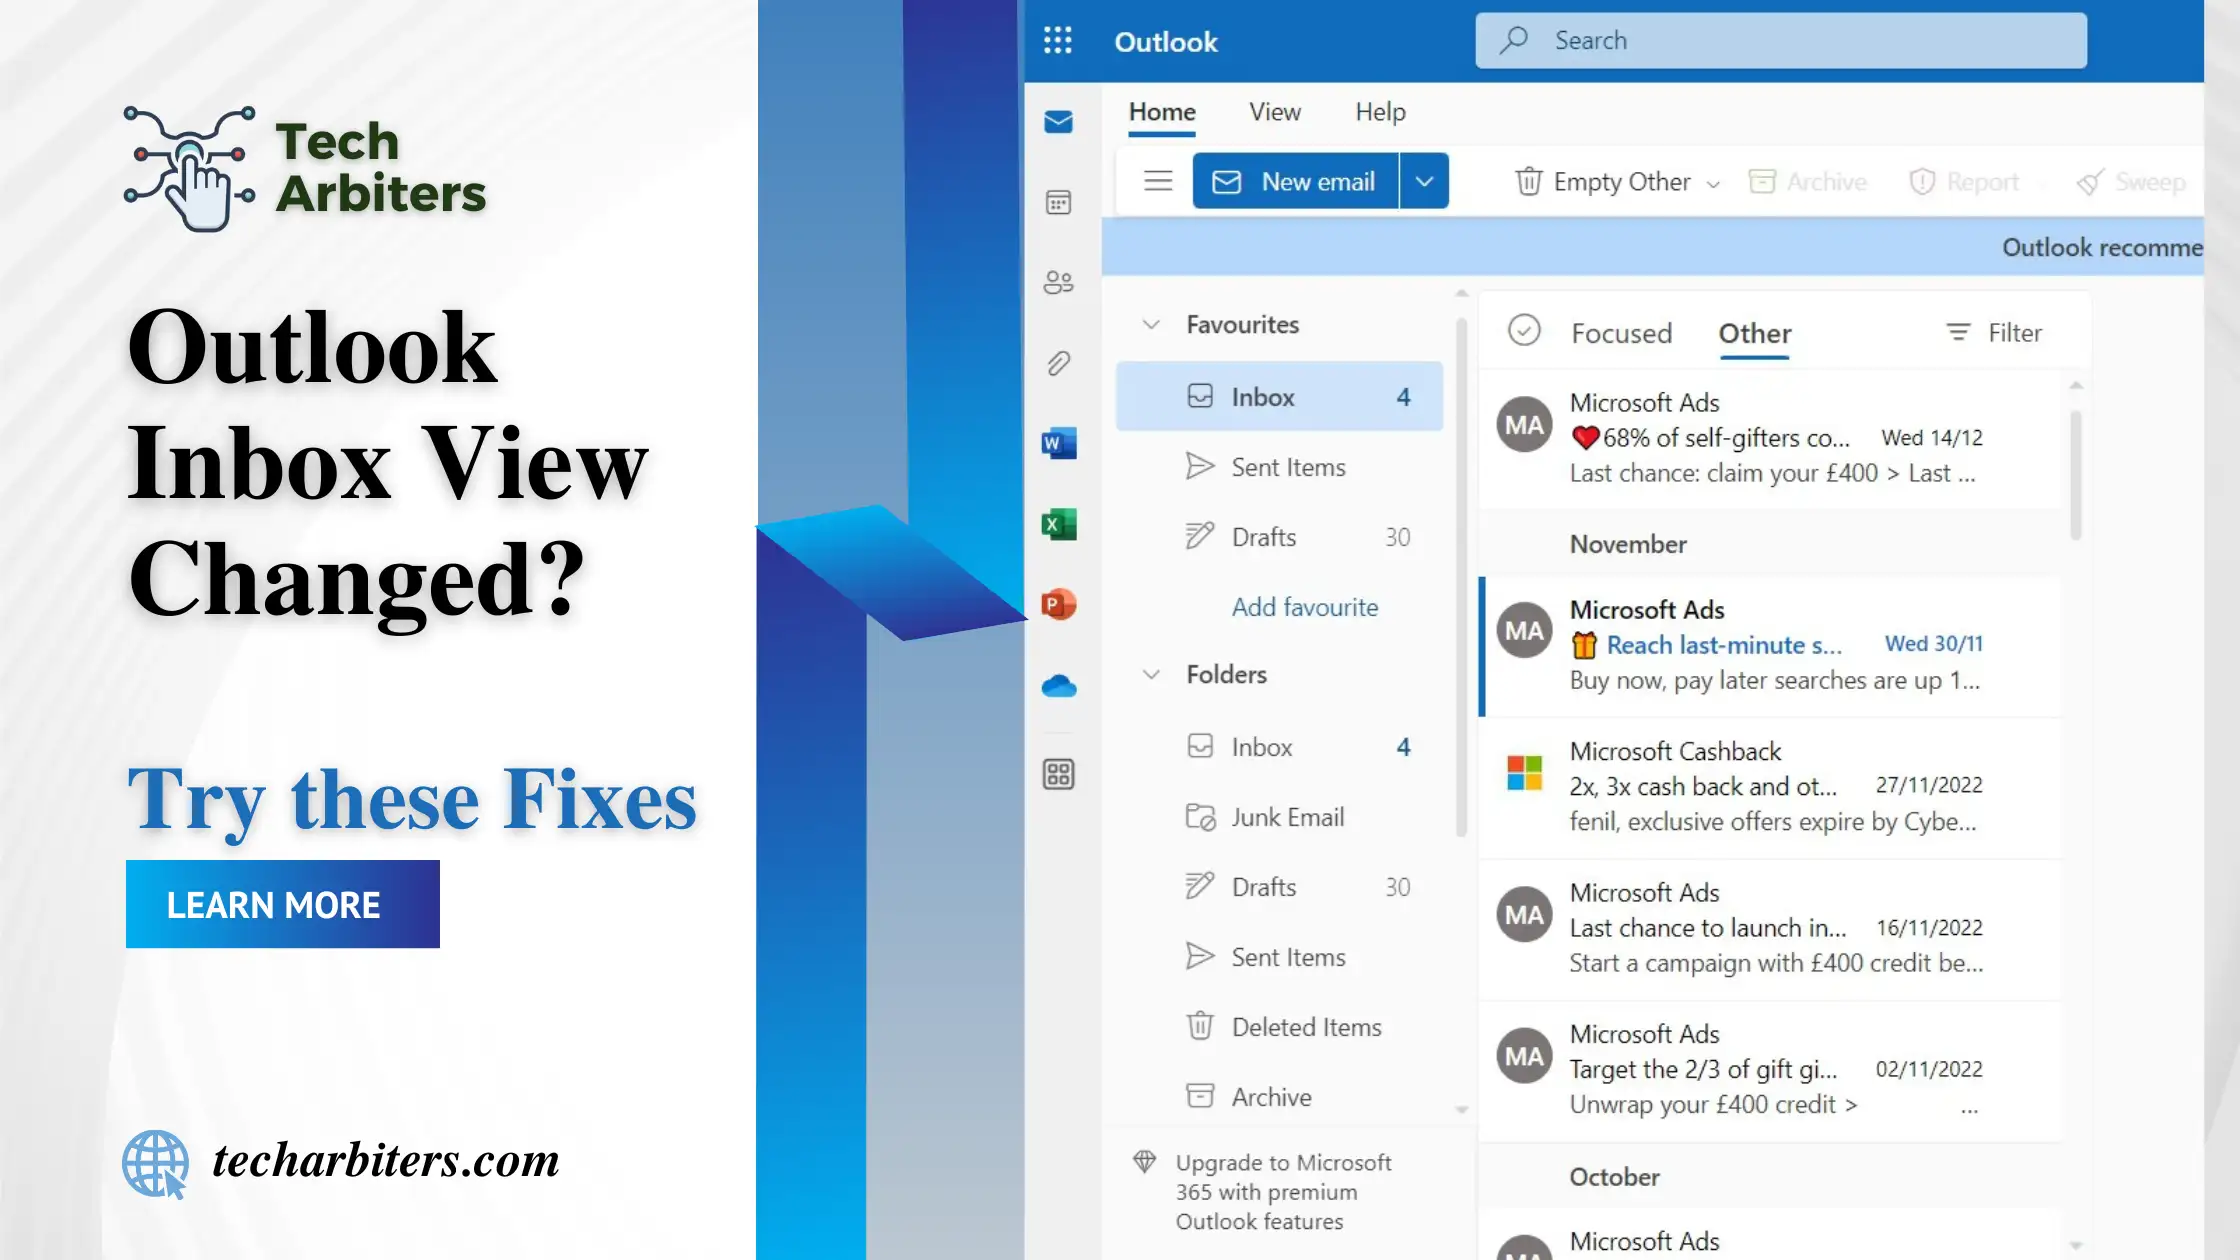 Fixed] Why Has My Outlook Inbox View Changed? - Tech Arbiters